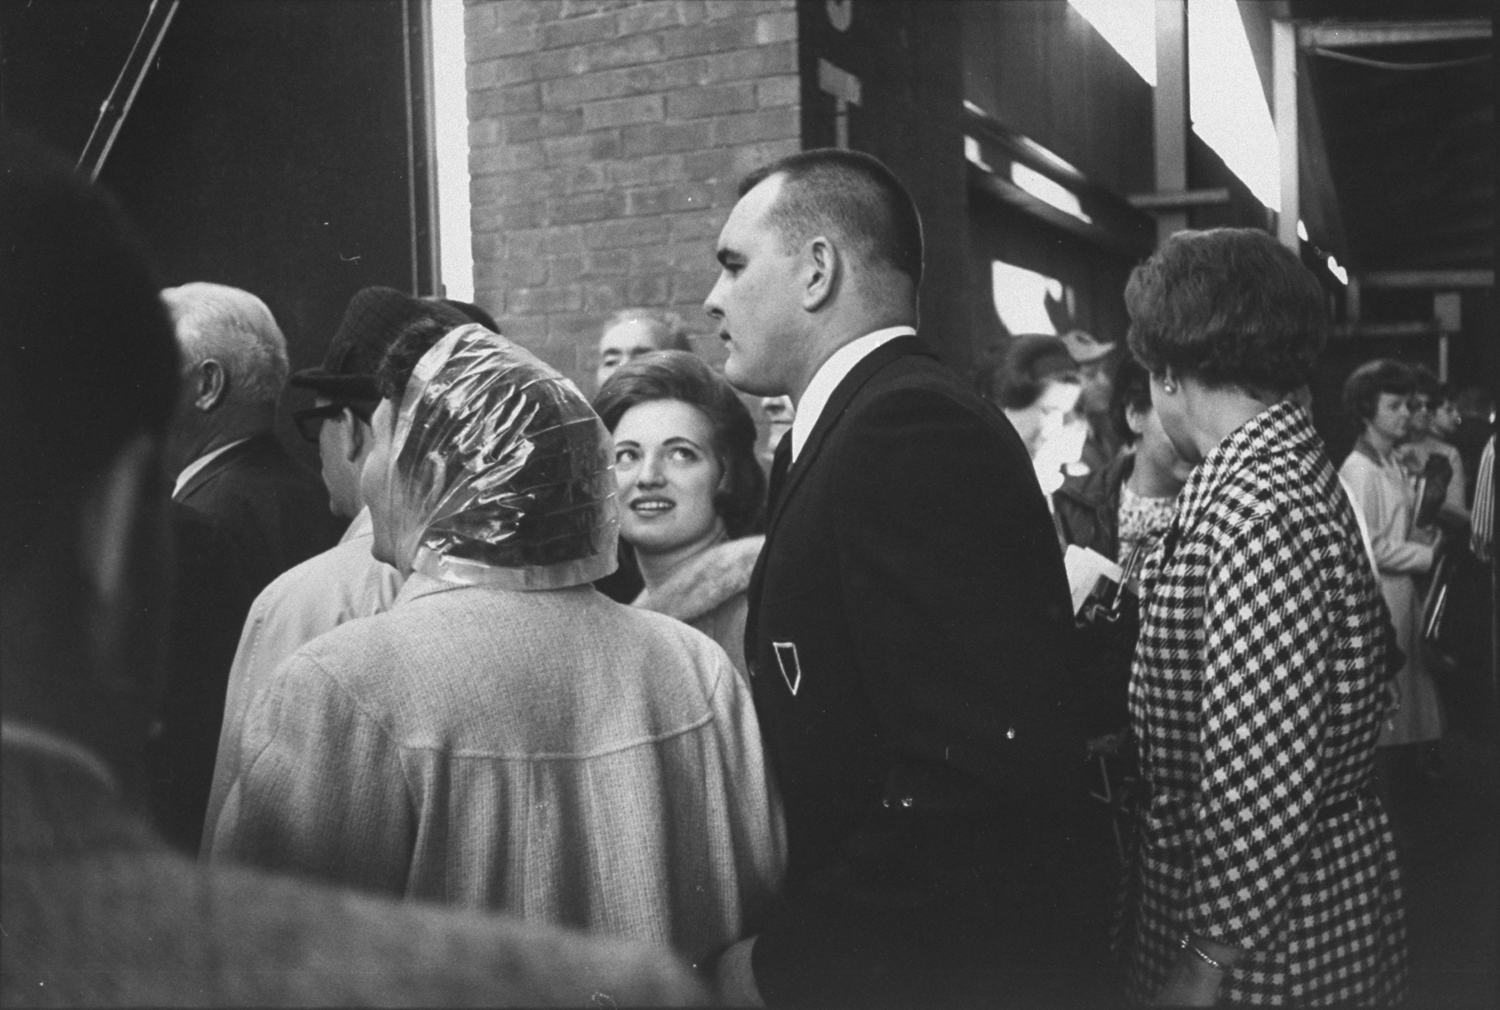 Leaving Wrigley Field after a game, Helen Butkus gazes at her hero. They met in high school, married while Dick was attending the U. of Illinois.